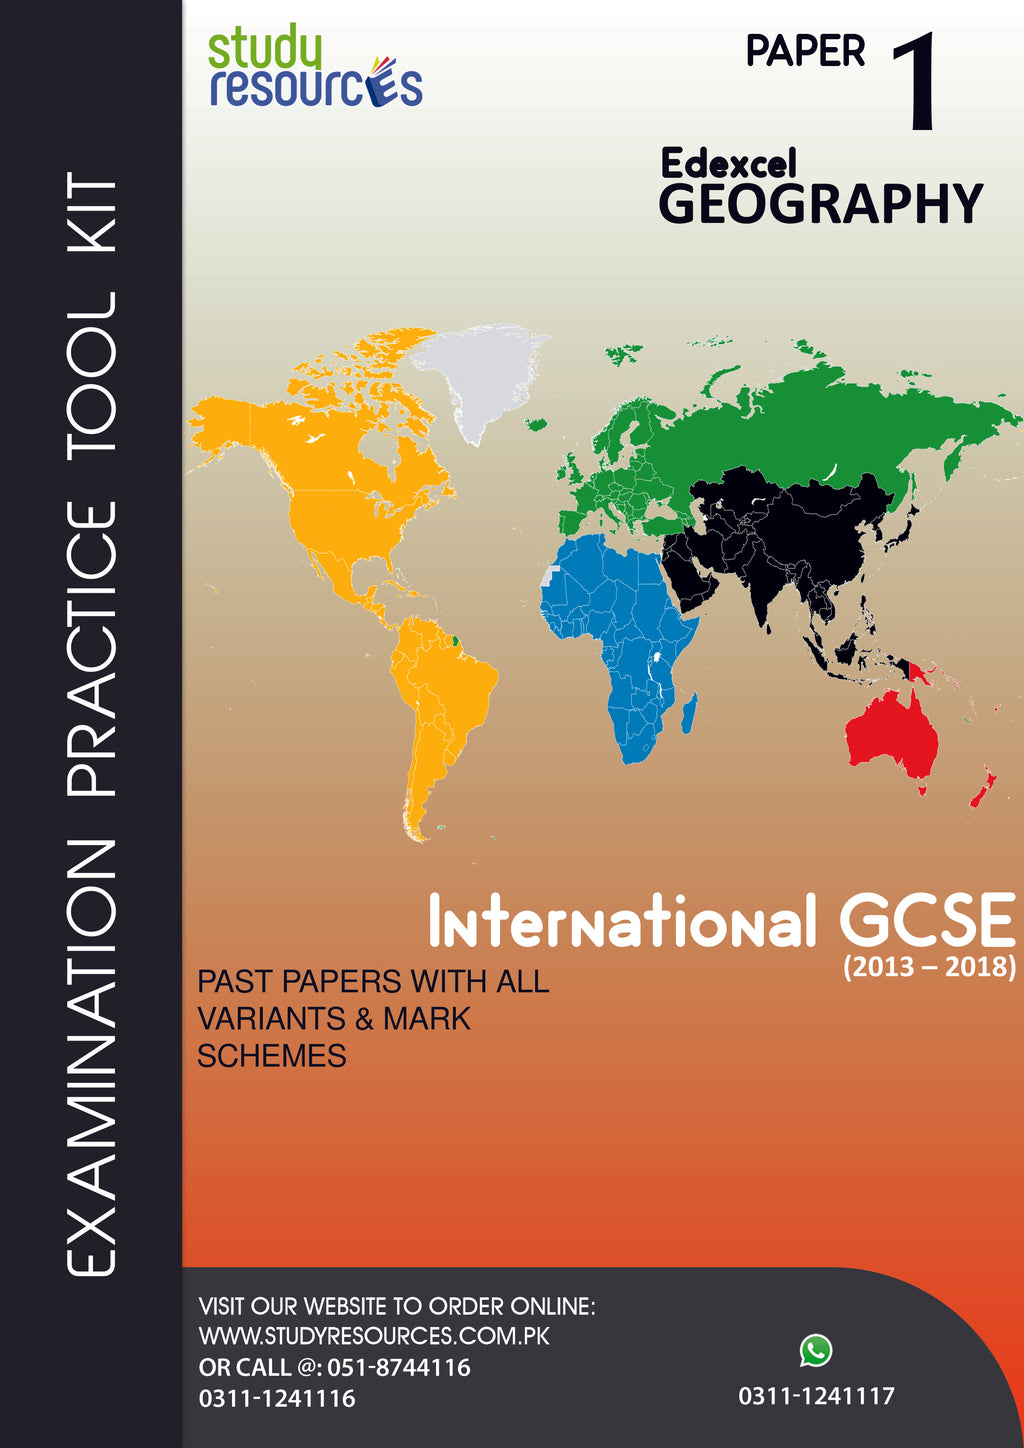 Edexcel IGCSE Geography P-1 Past Papers (2013-2018)